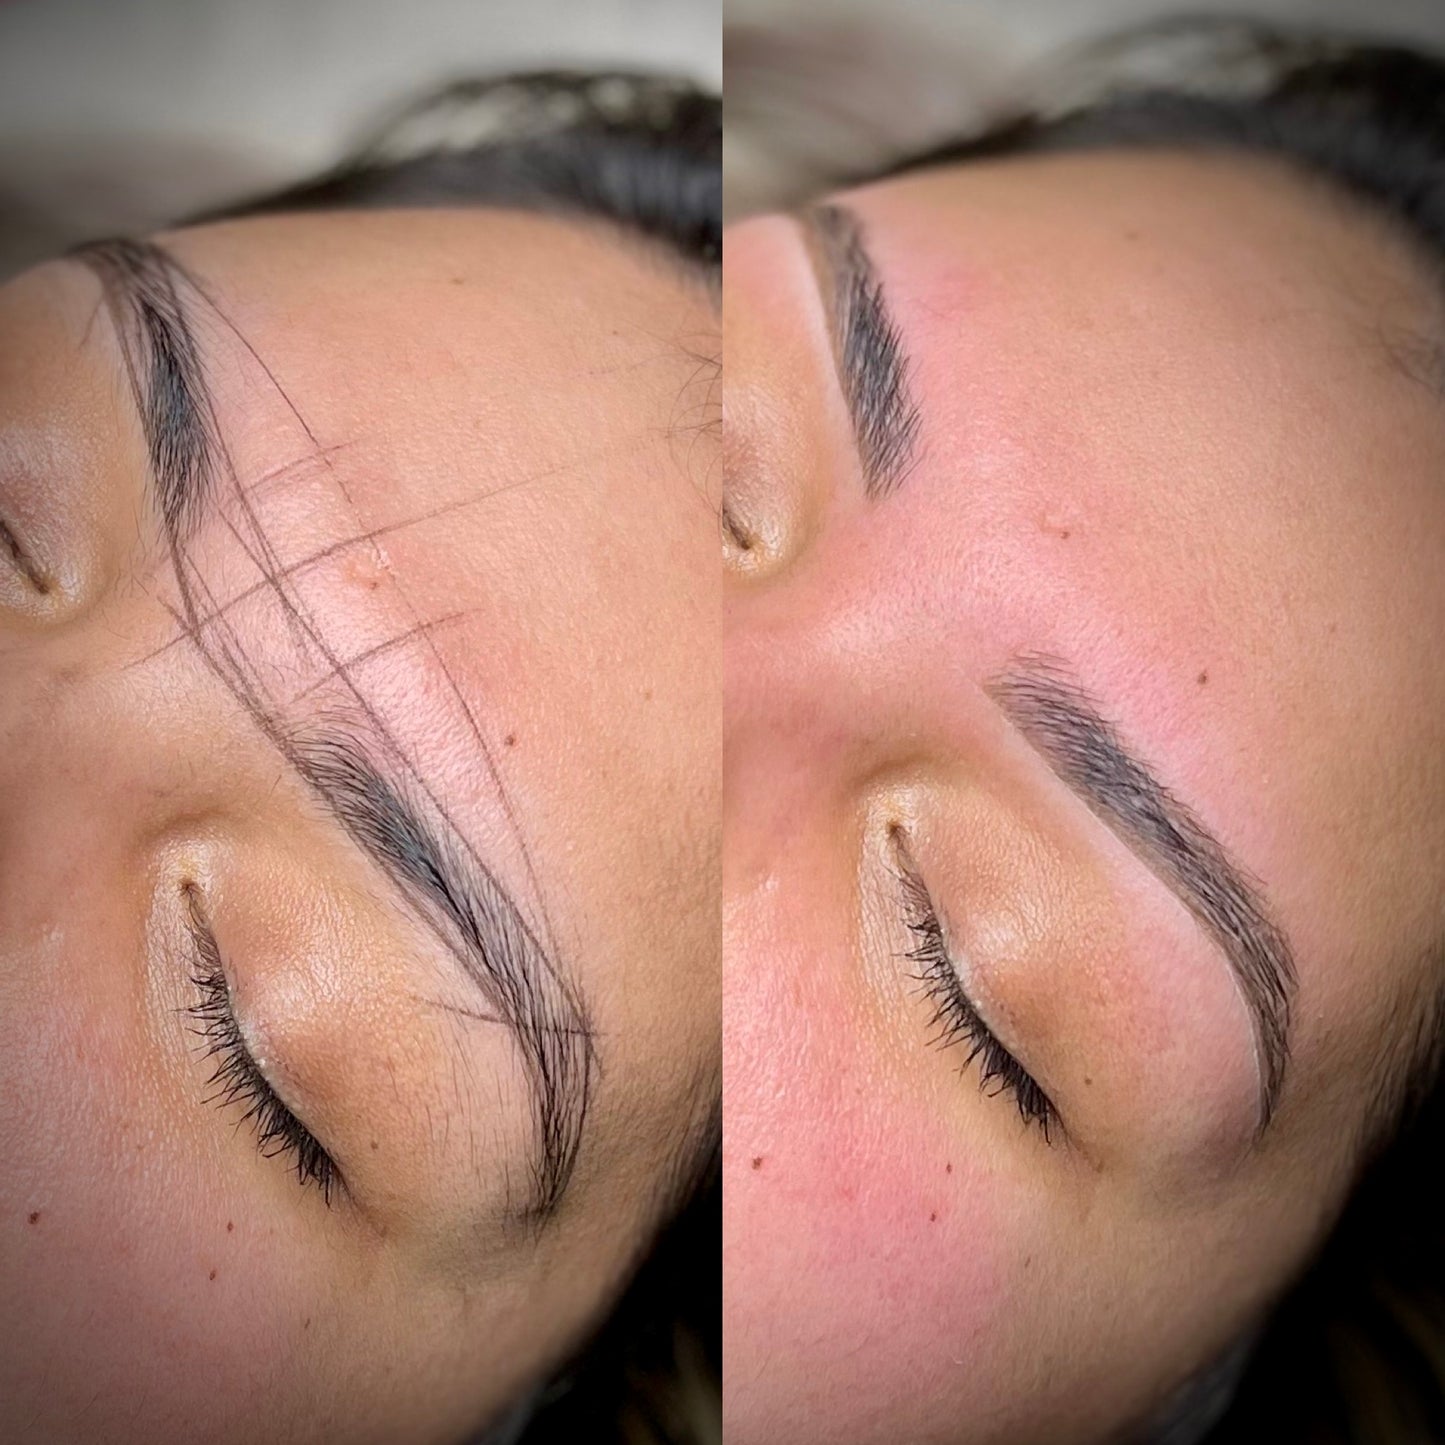 Brow Mapping In-Person Class